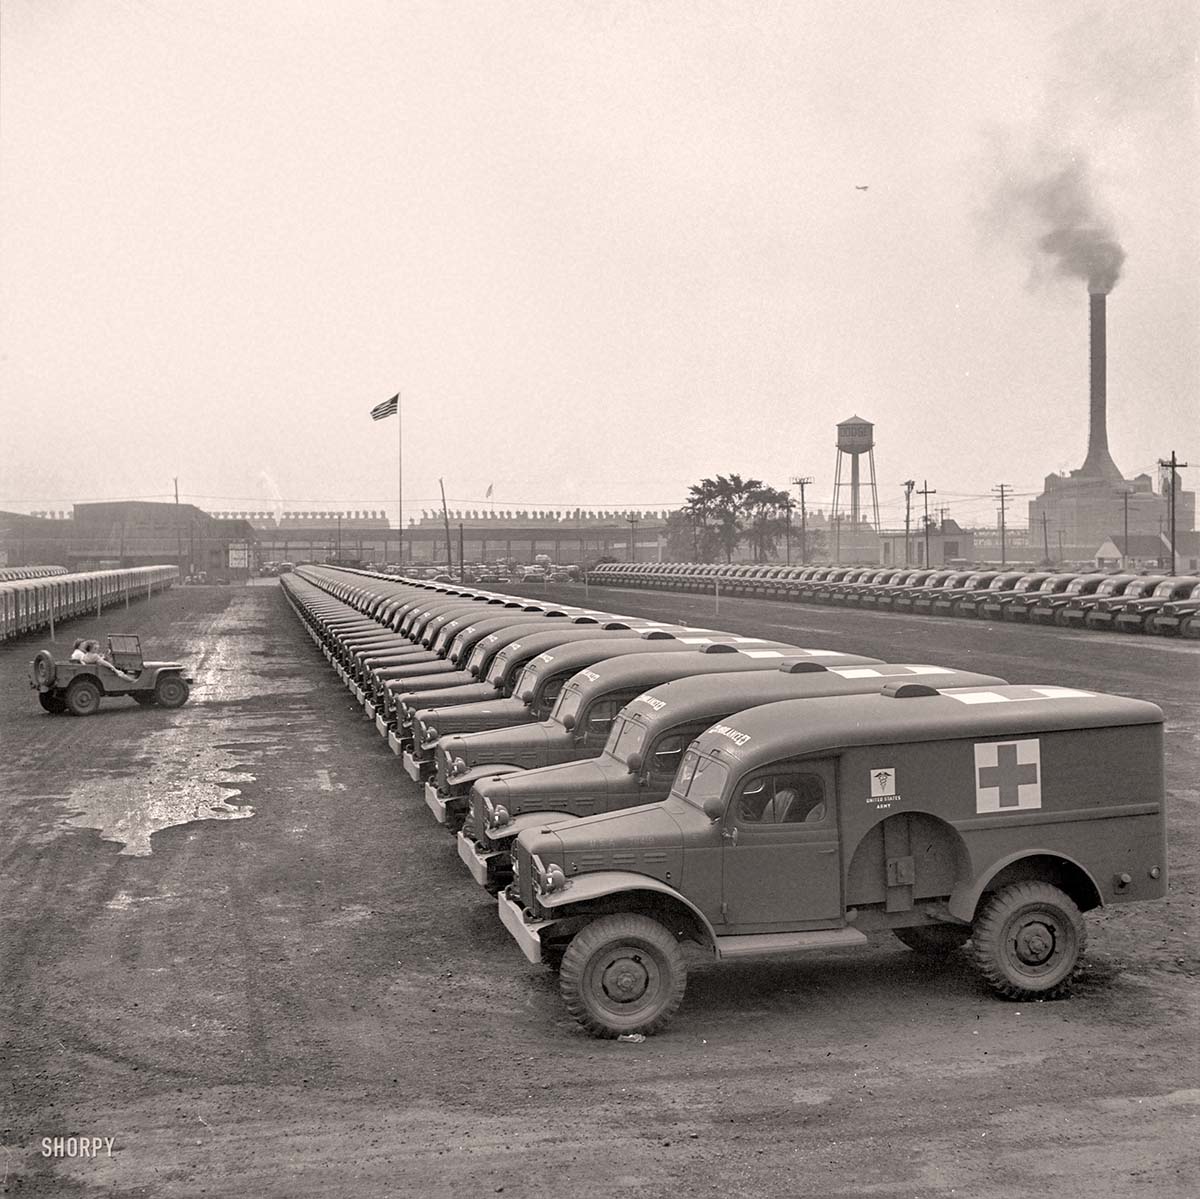 Detroit, Michigan. Chrysler Corporation Dodge truck plant, Dodge ambulances for delivery to the Army, 1942